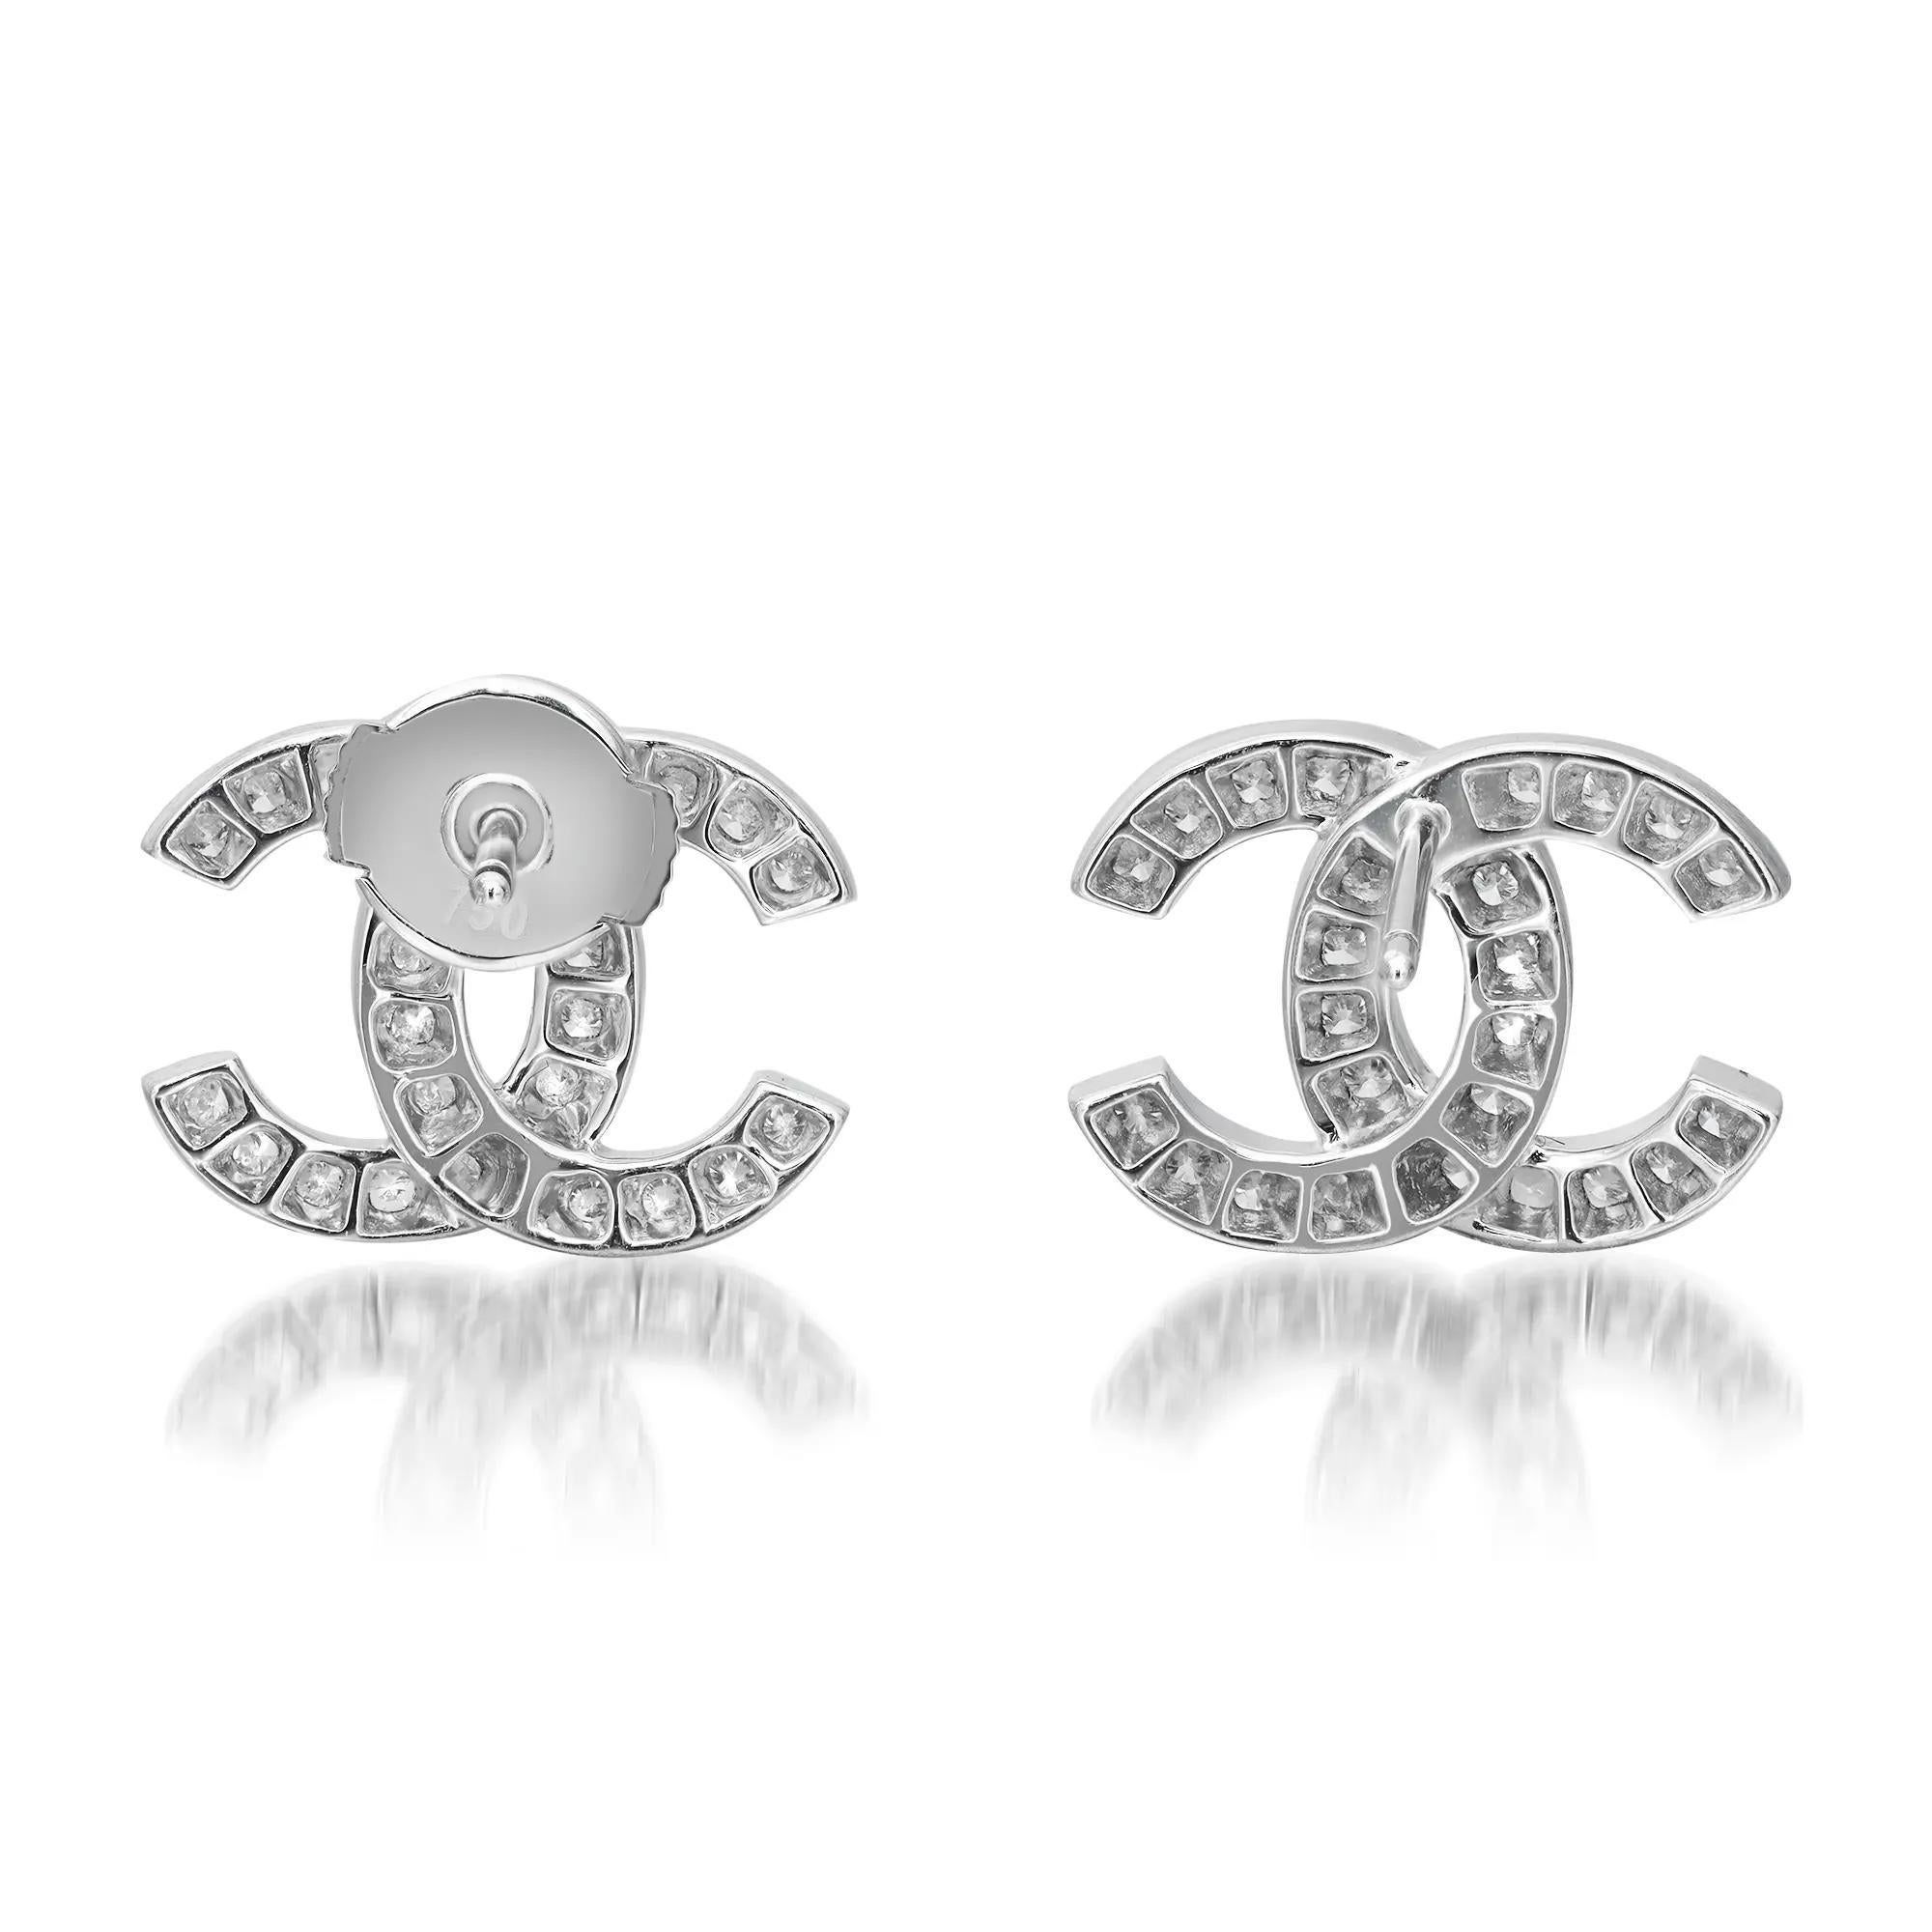 These stunning Chanel Double C earrings crafted in 18K white gold and encrusted with approx. 0.56 carat of bright white dazzling round brilliant cut diamonds. The earrings measure 14.6mm x 10.9mm. Signed Chanel, 750. Excellent preowned condition.